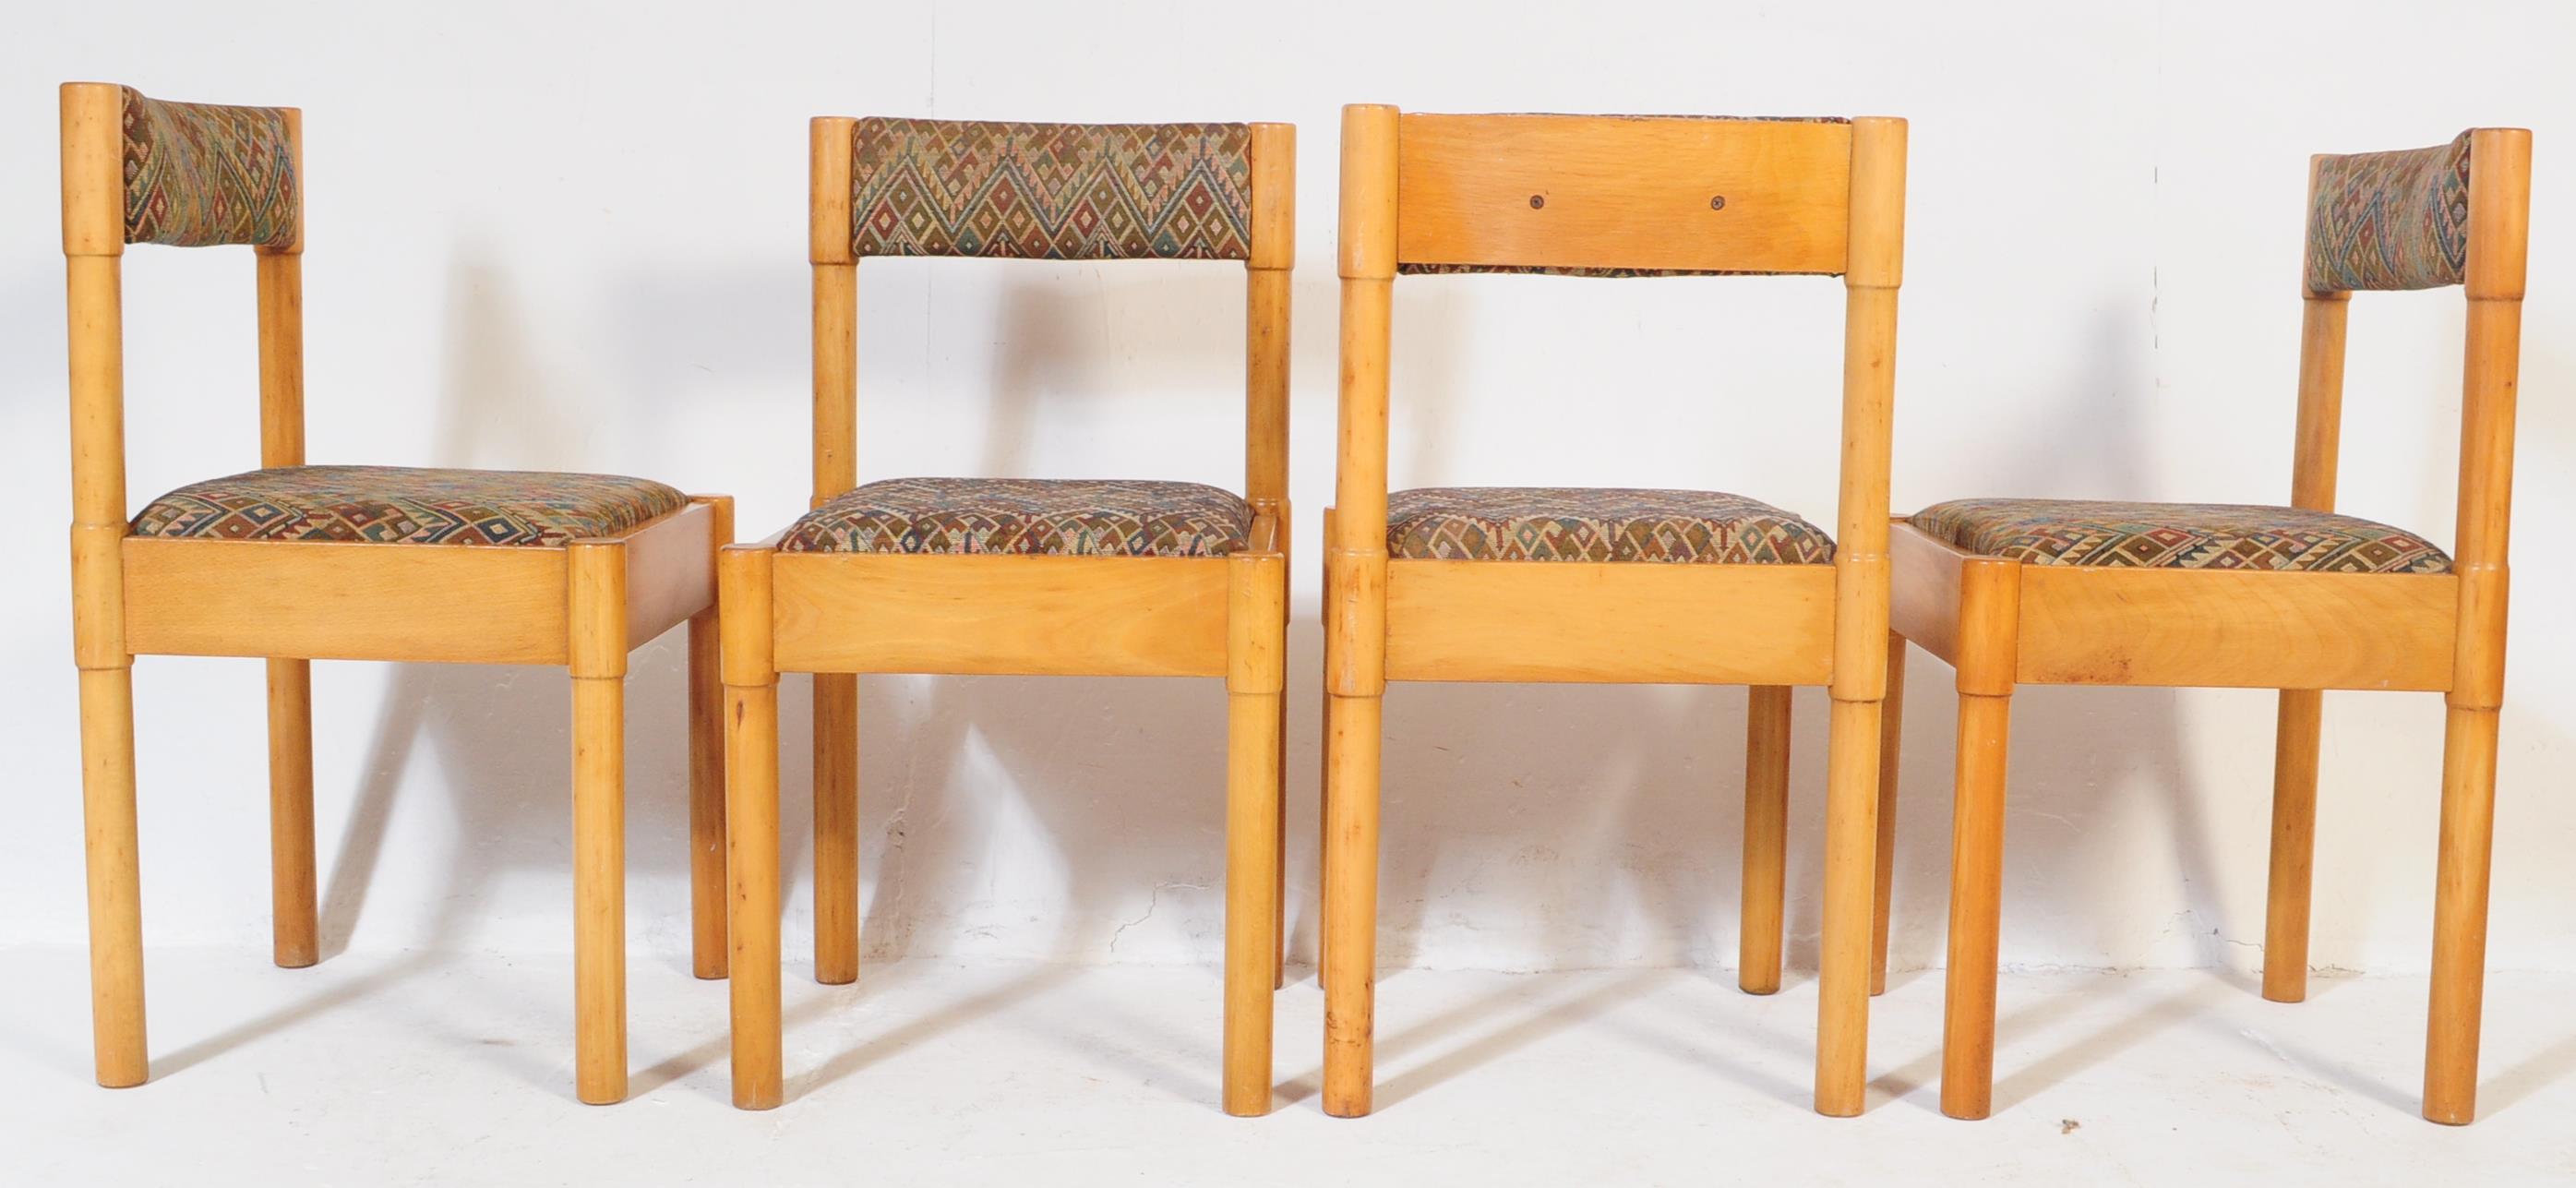 IN THE MANNER OF VICO MAGISTRETTI - FOUR BEECH DINING CHAIRS - Image 3 of 4